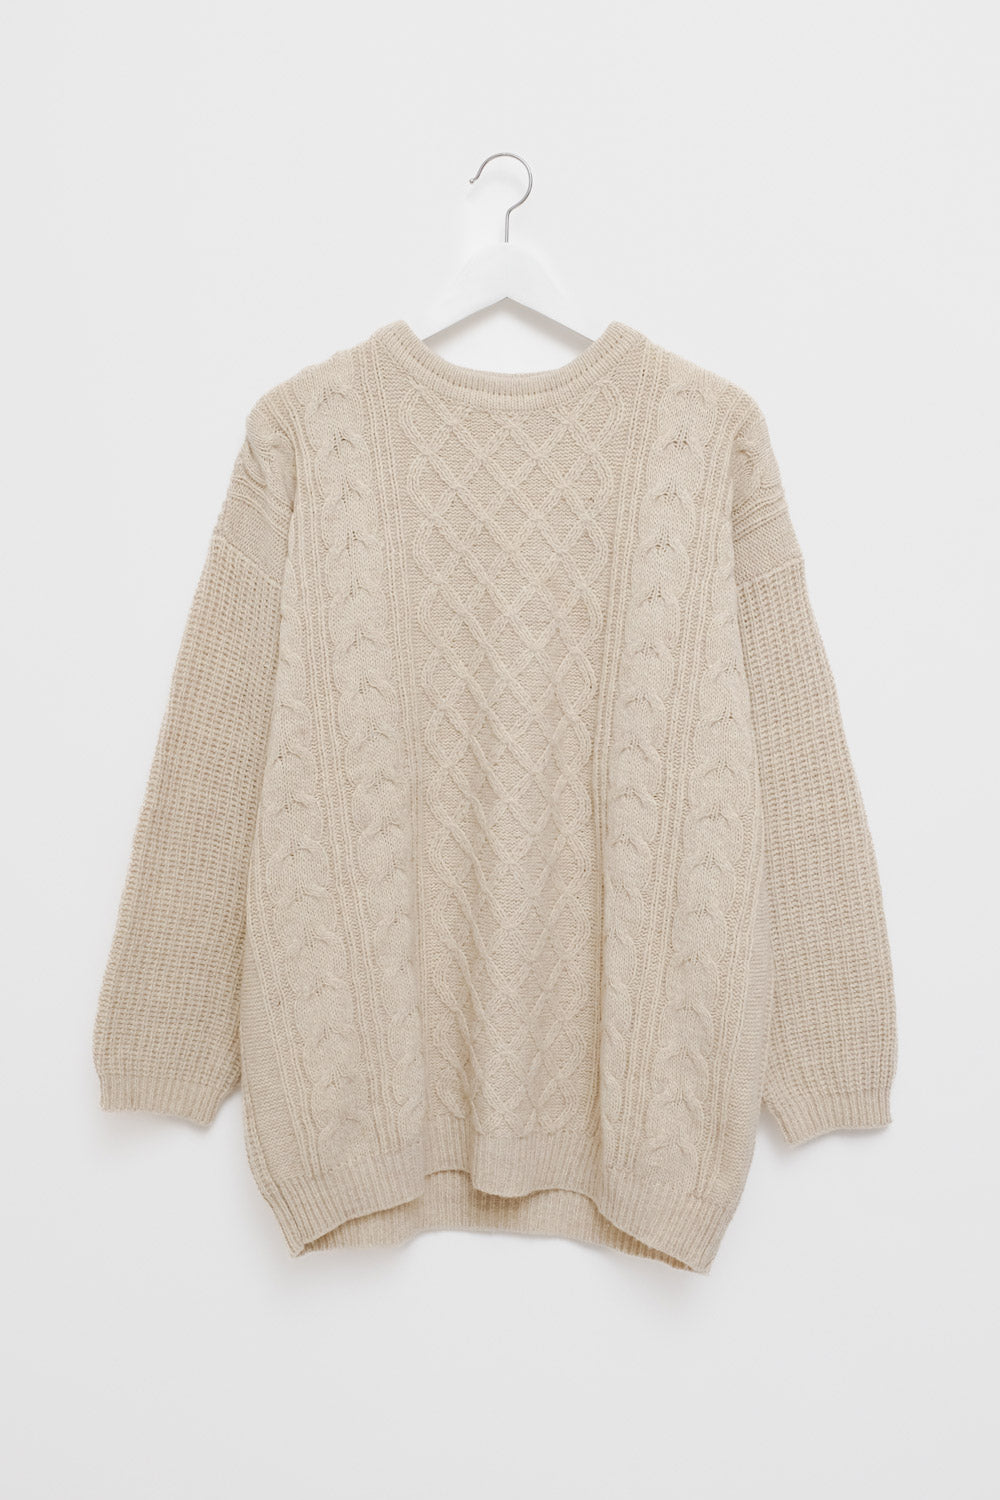 CLASSY SAND CABLE KNIT CHUNKY SWEATER